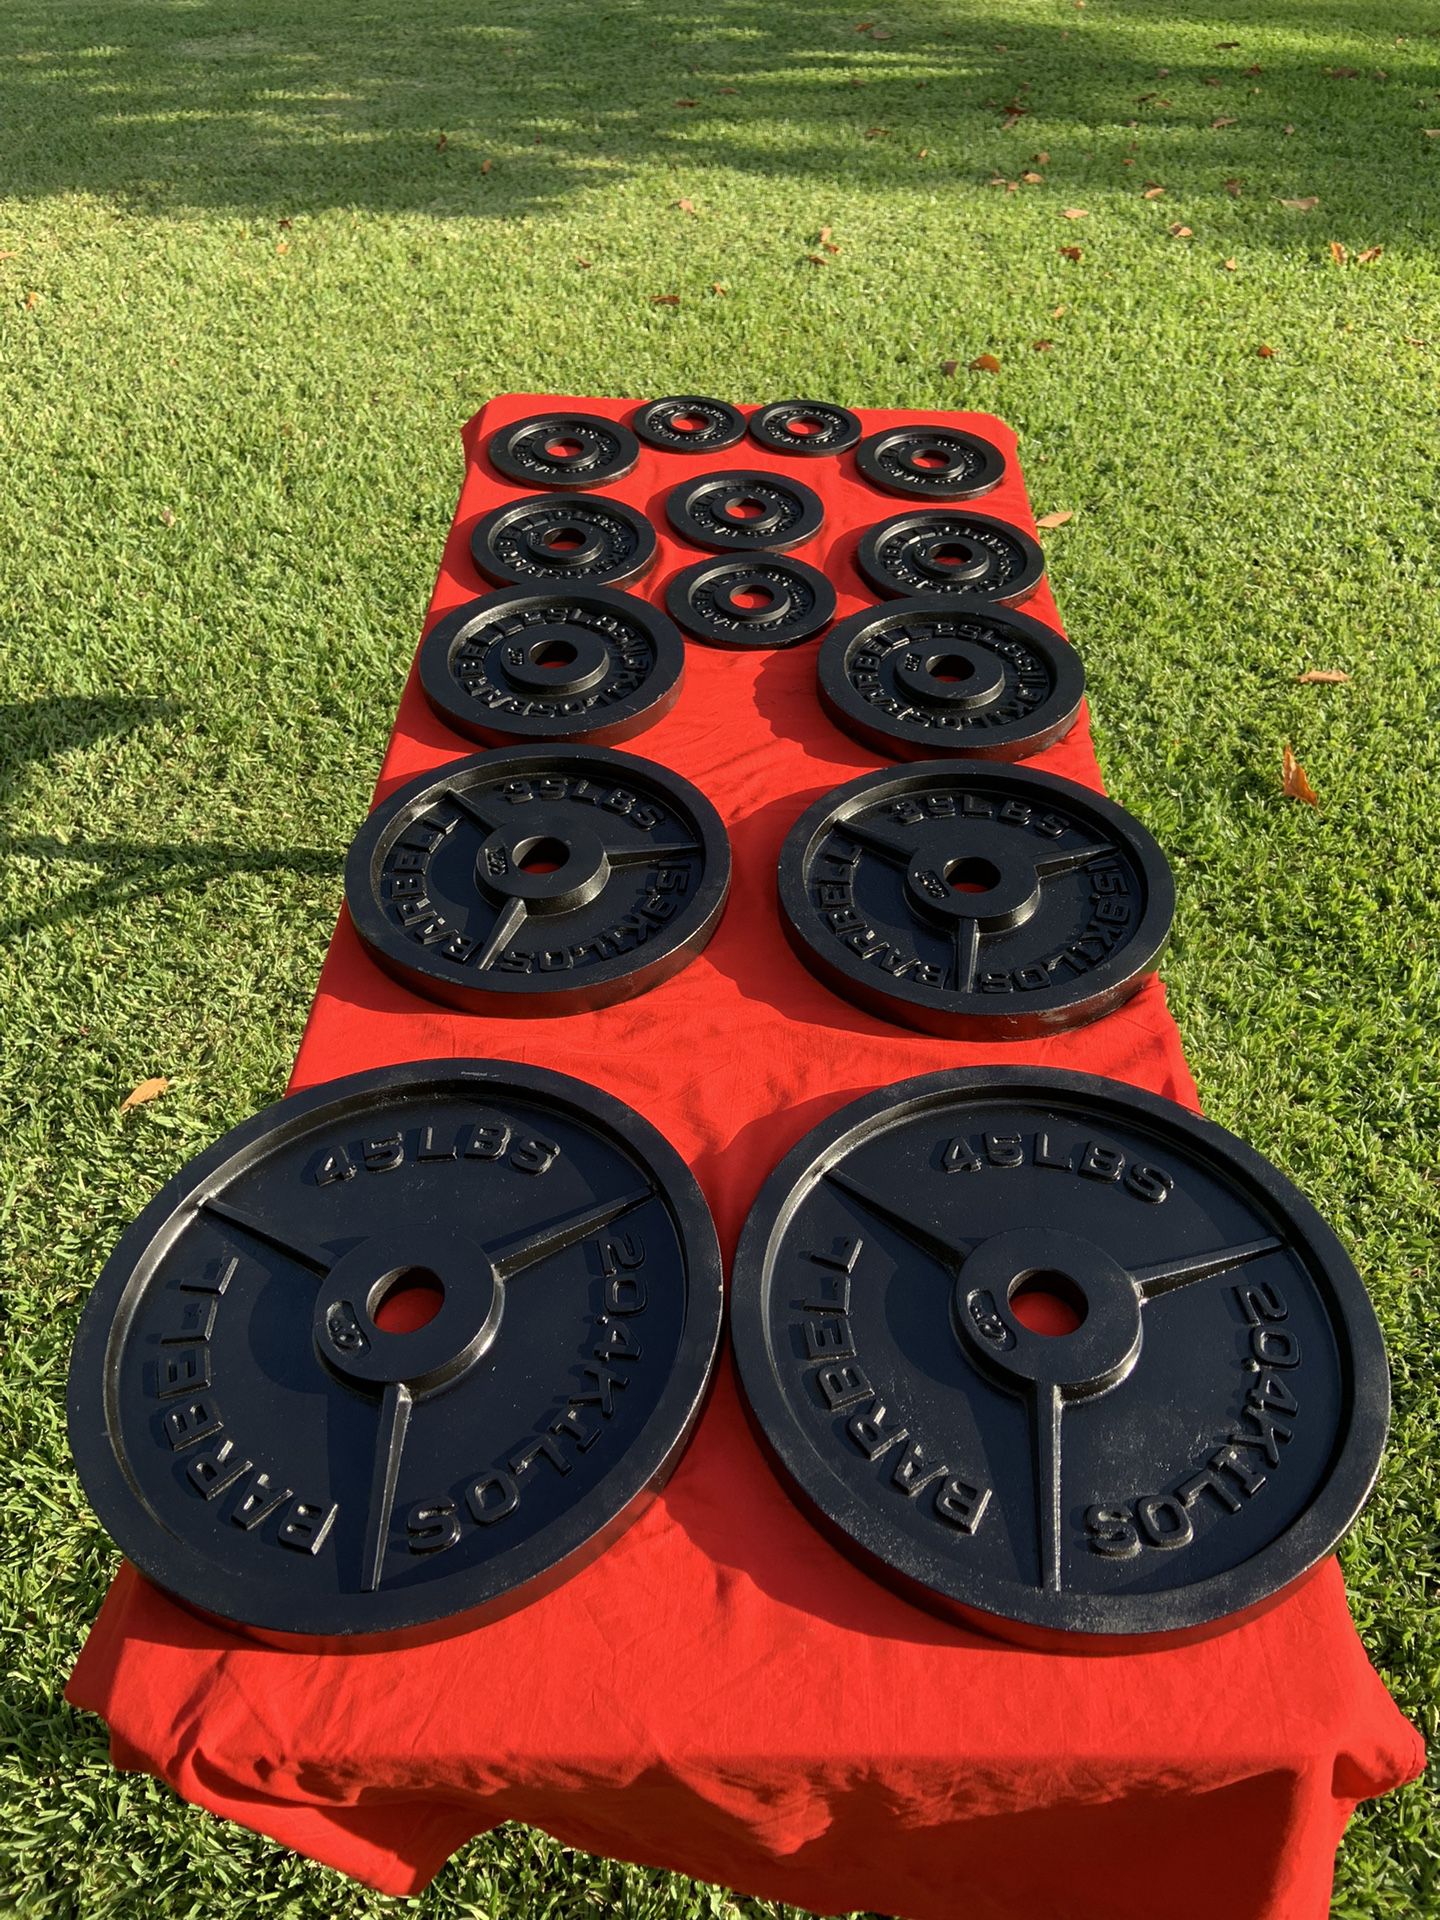 Full Matching Set Of Olympic Weight Plates